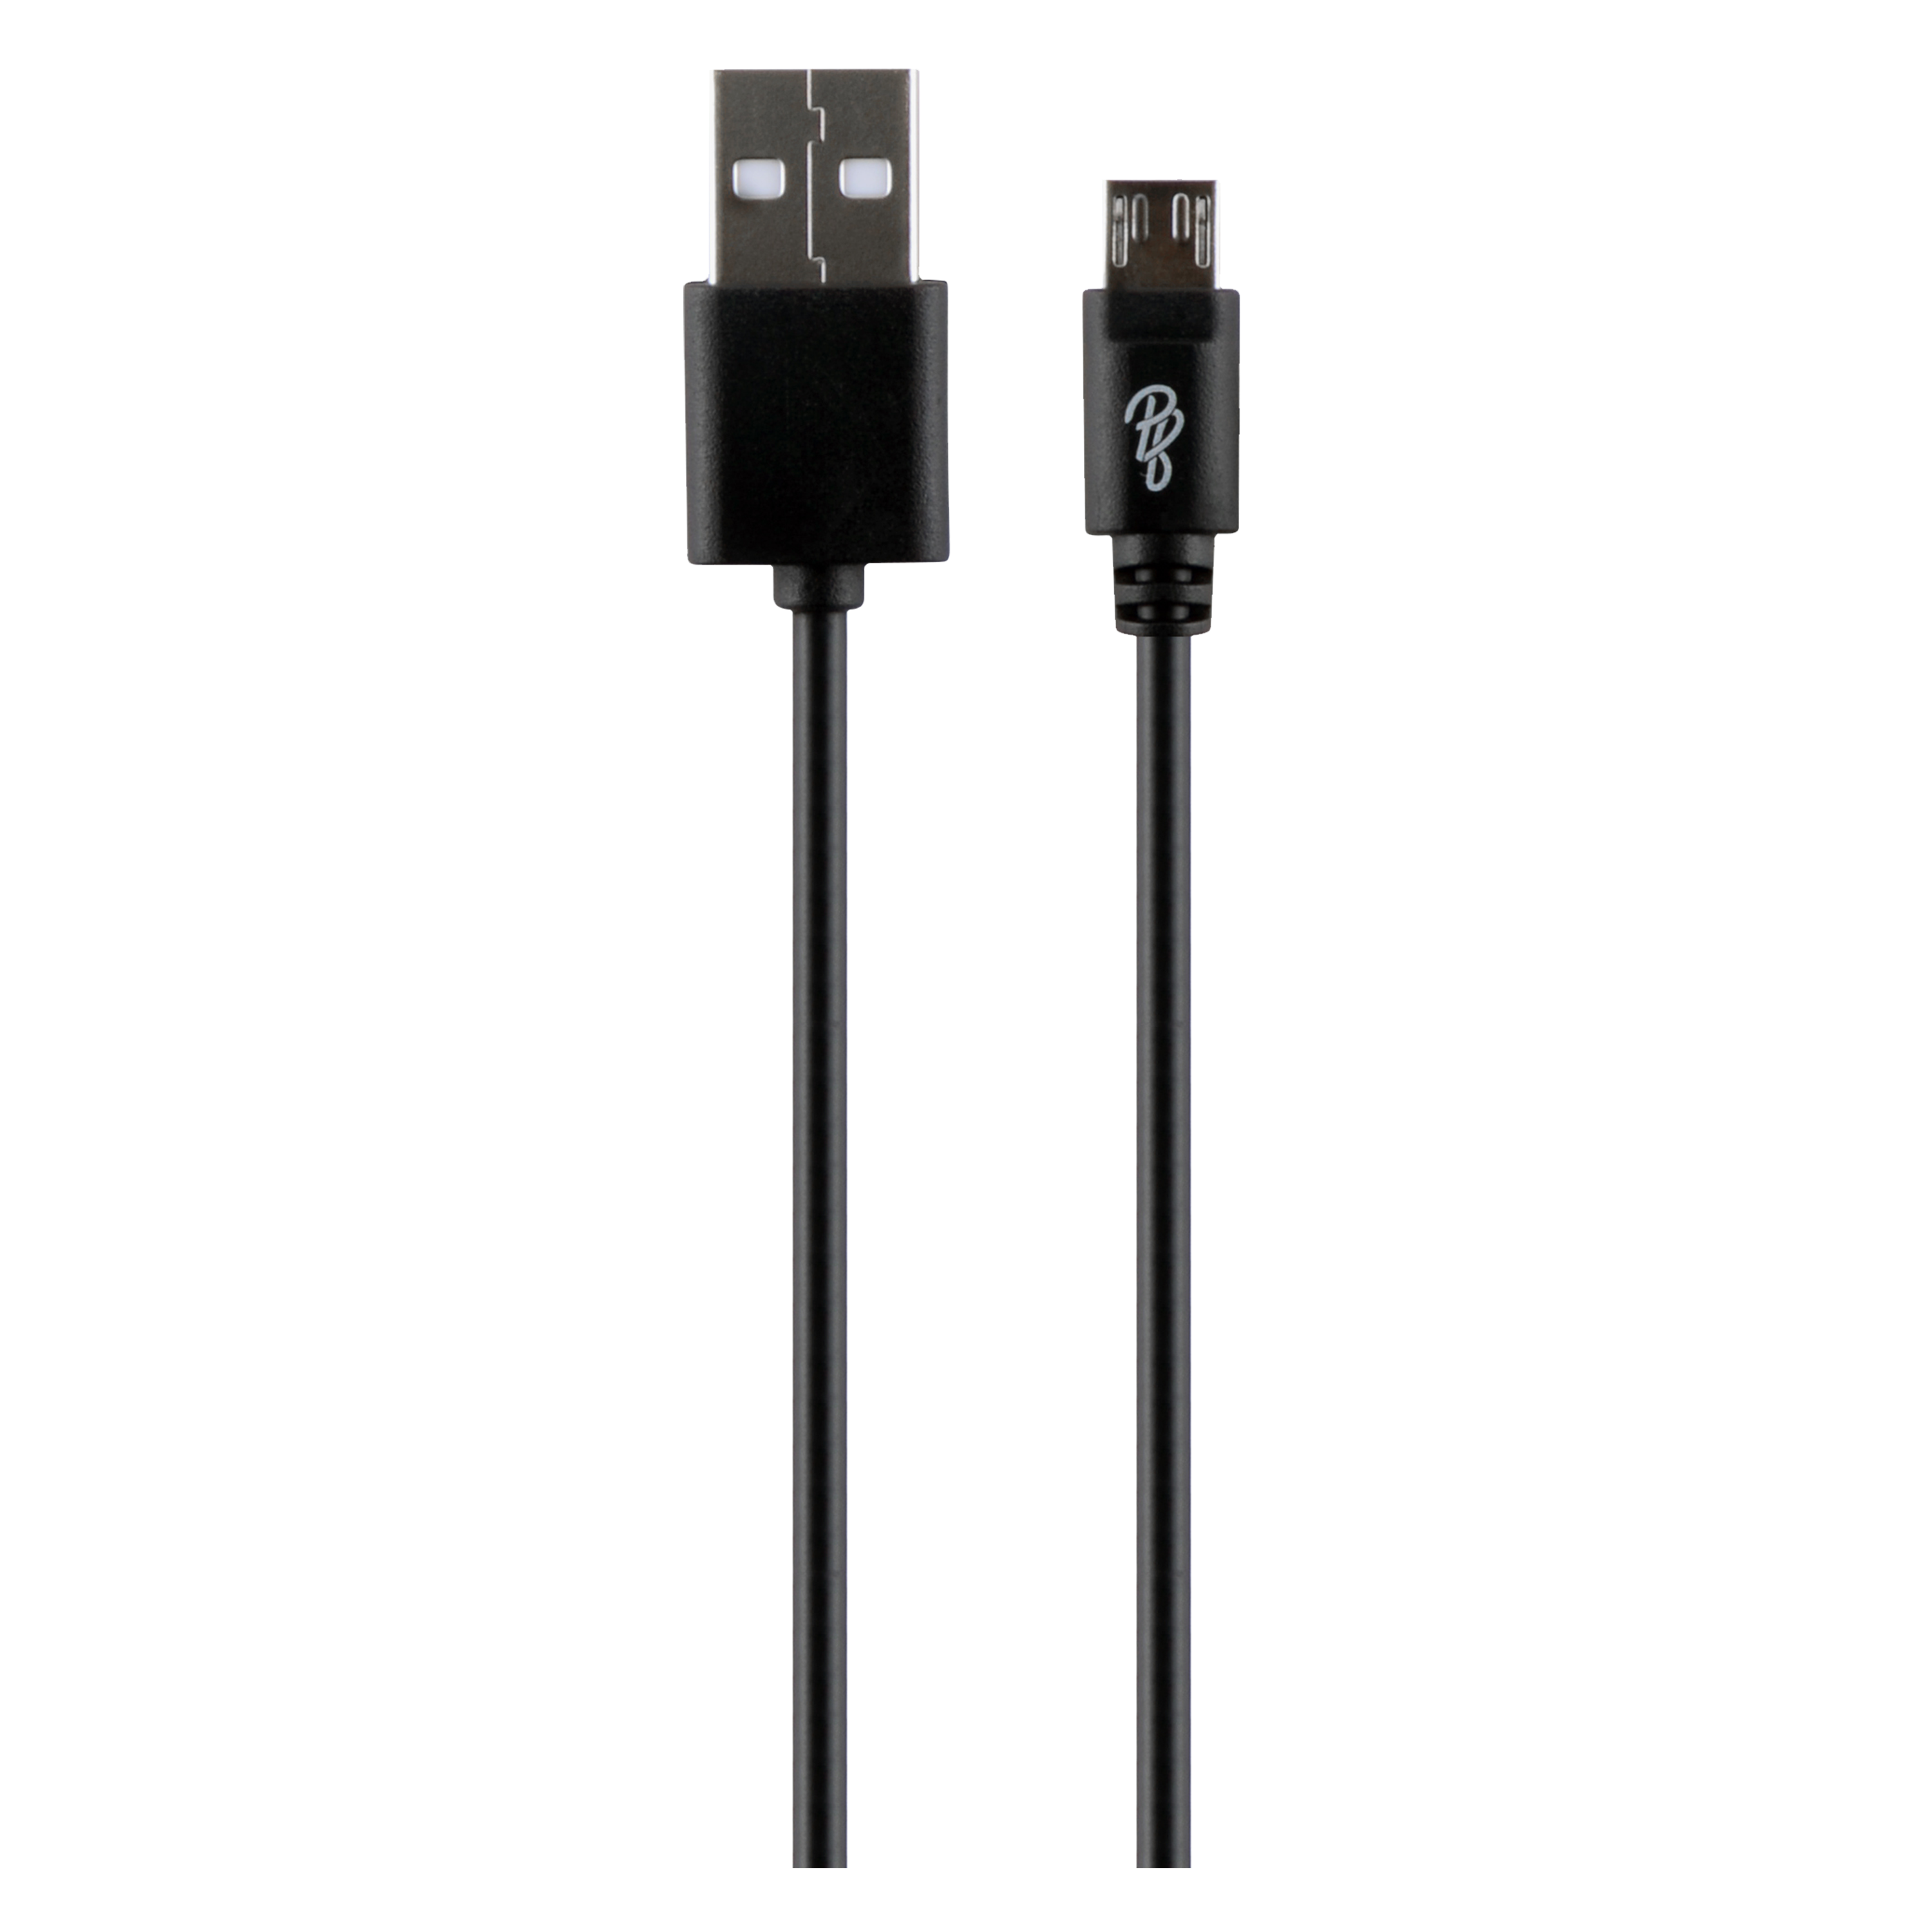 PRO BASS Power 1M USB Cable